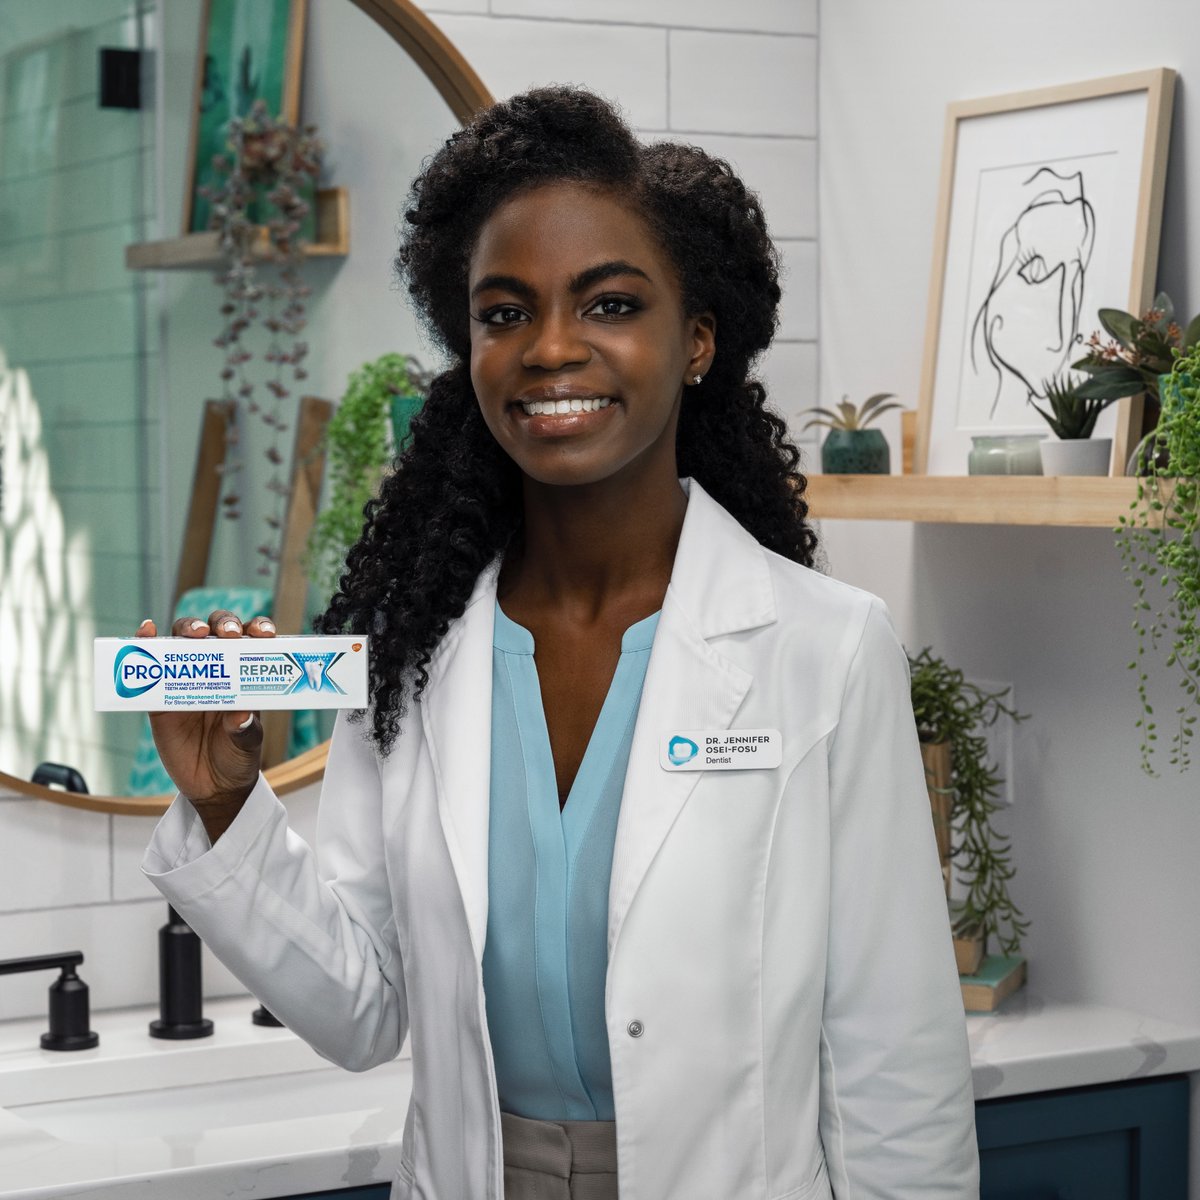 Swipe to see what keeps Dr Jennifer’s teeth strong and protected! 👉 Our most advanced enamel care formulation, Pronamel Intensive Enamel Repair deeply penetrates acid weakened enamel surfaces to help actively repair your enamel.